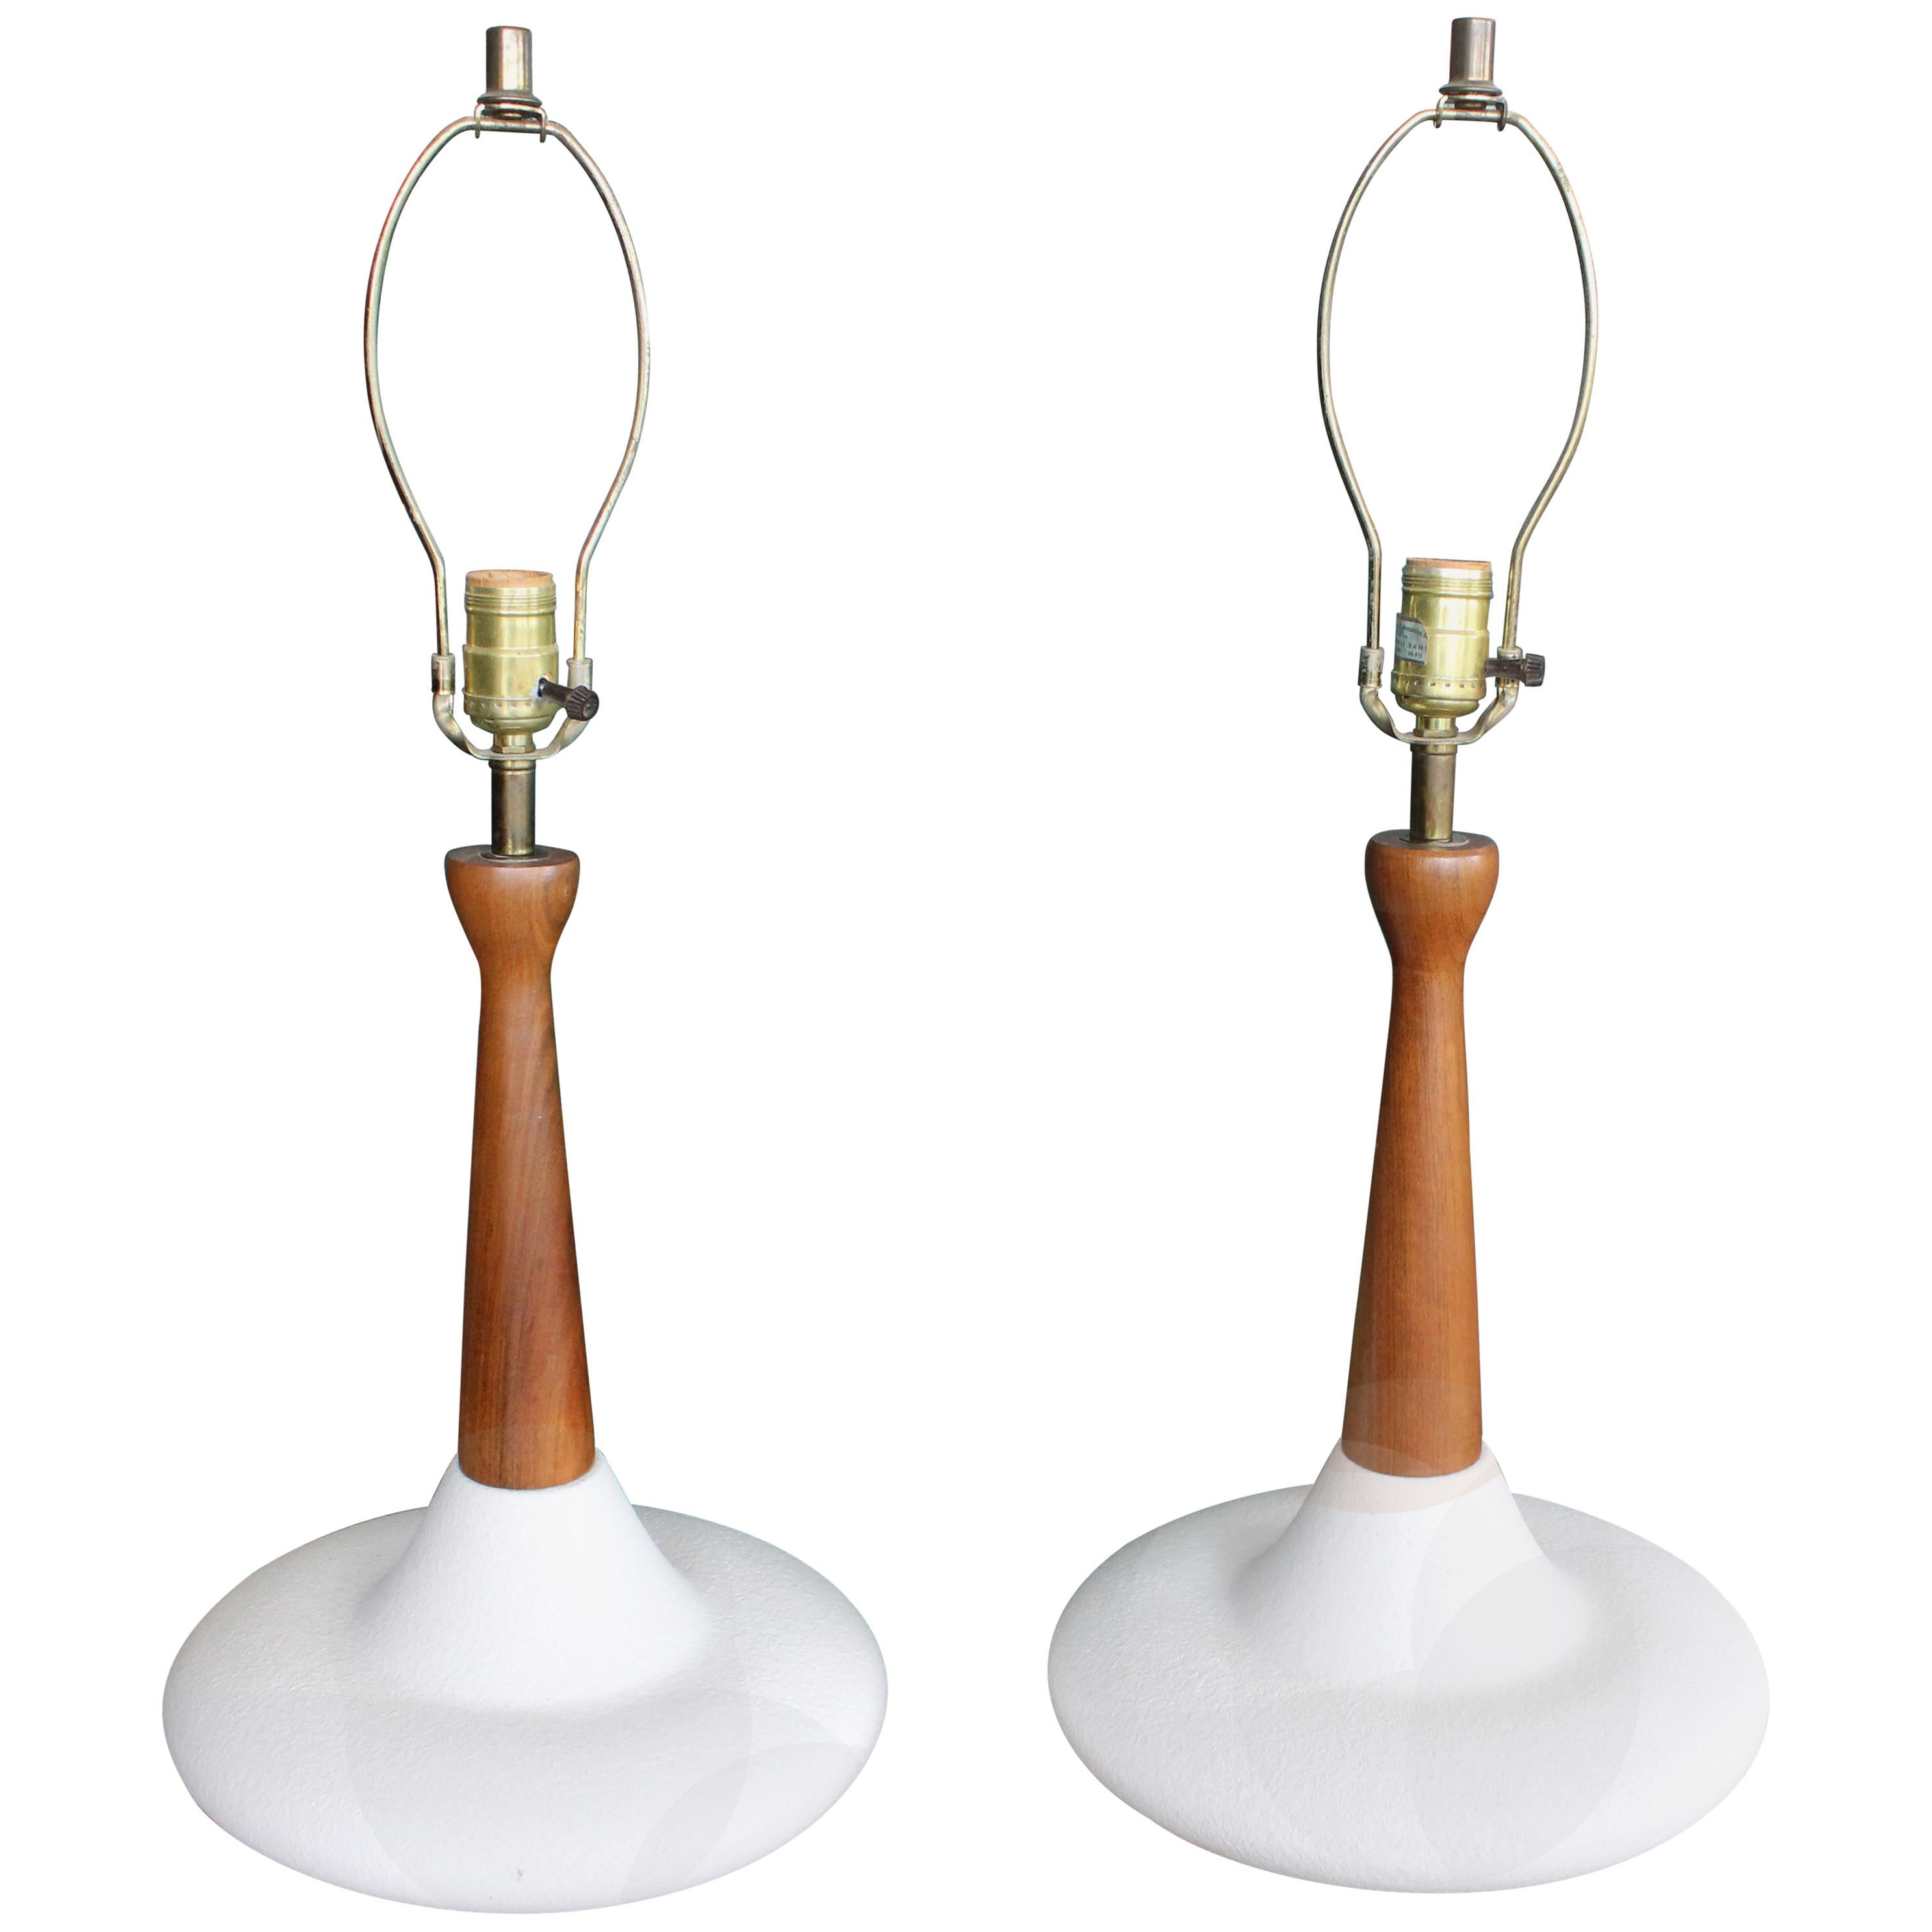 Pair of Mid-Century Modern Atomic Walnut Pottery Table Lamps